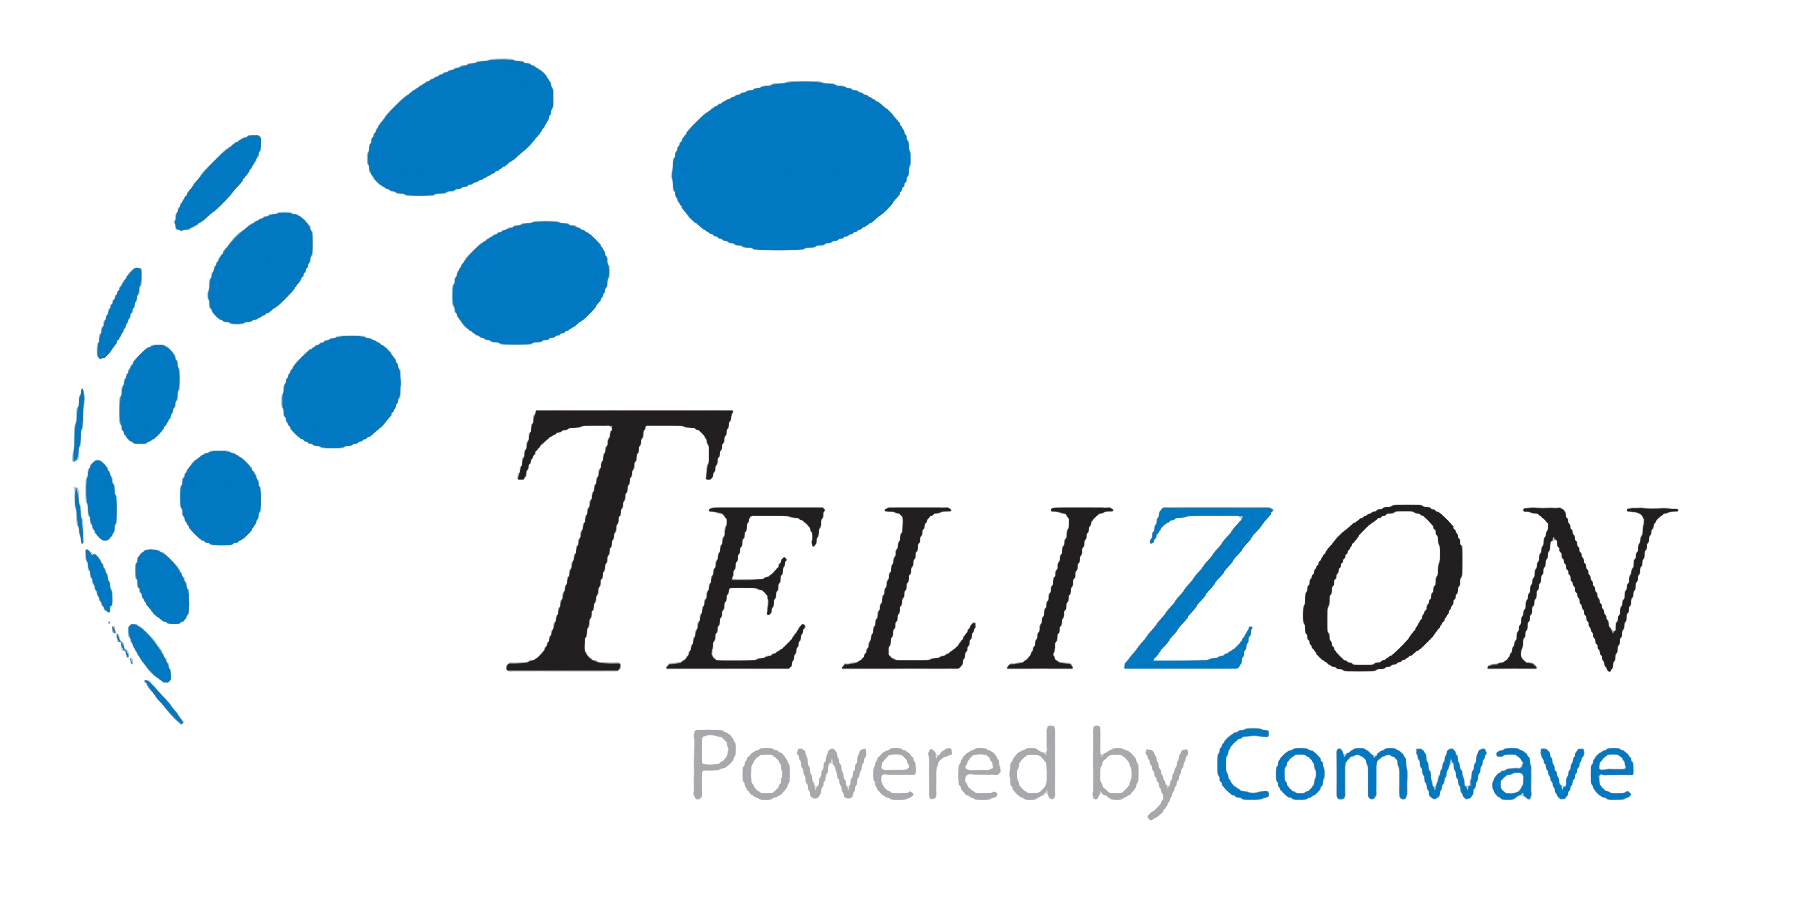 Slide Logo for one of our partners, Telizon